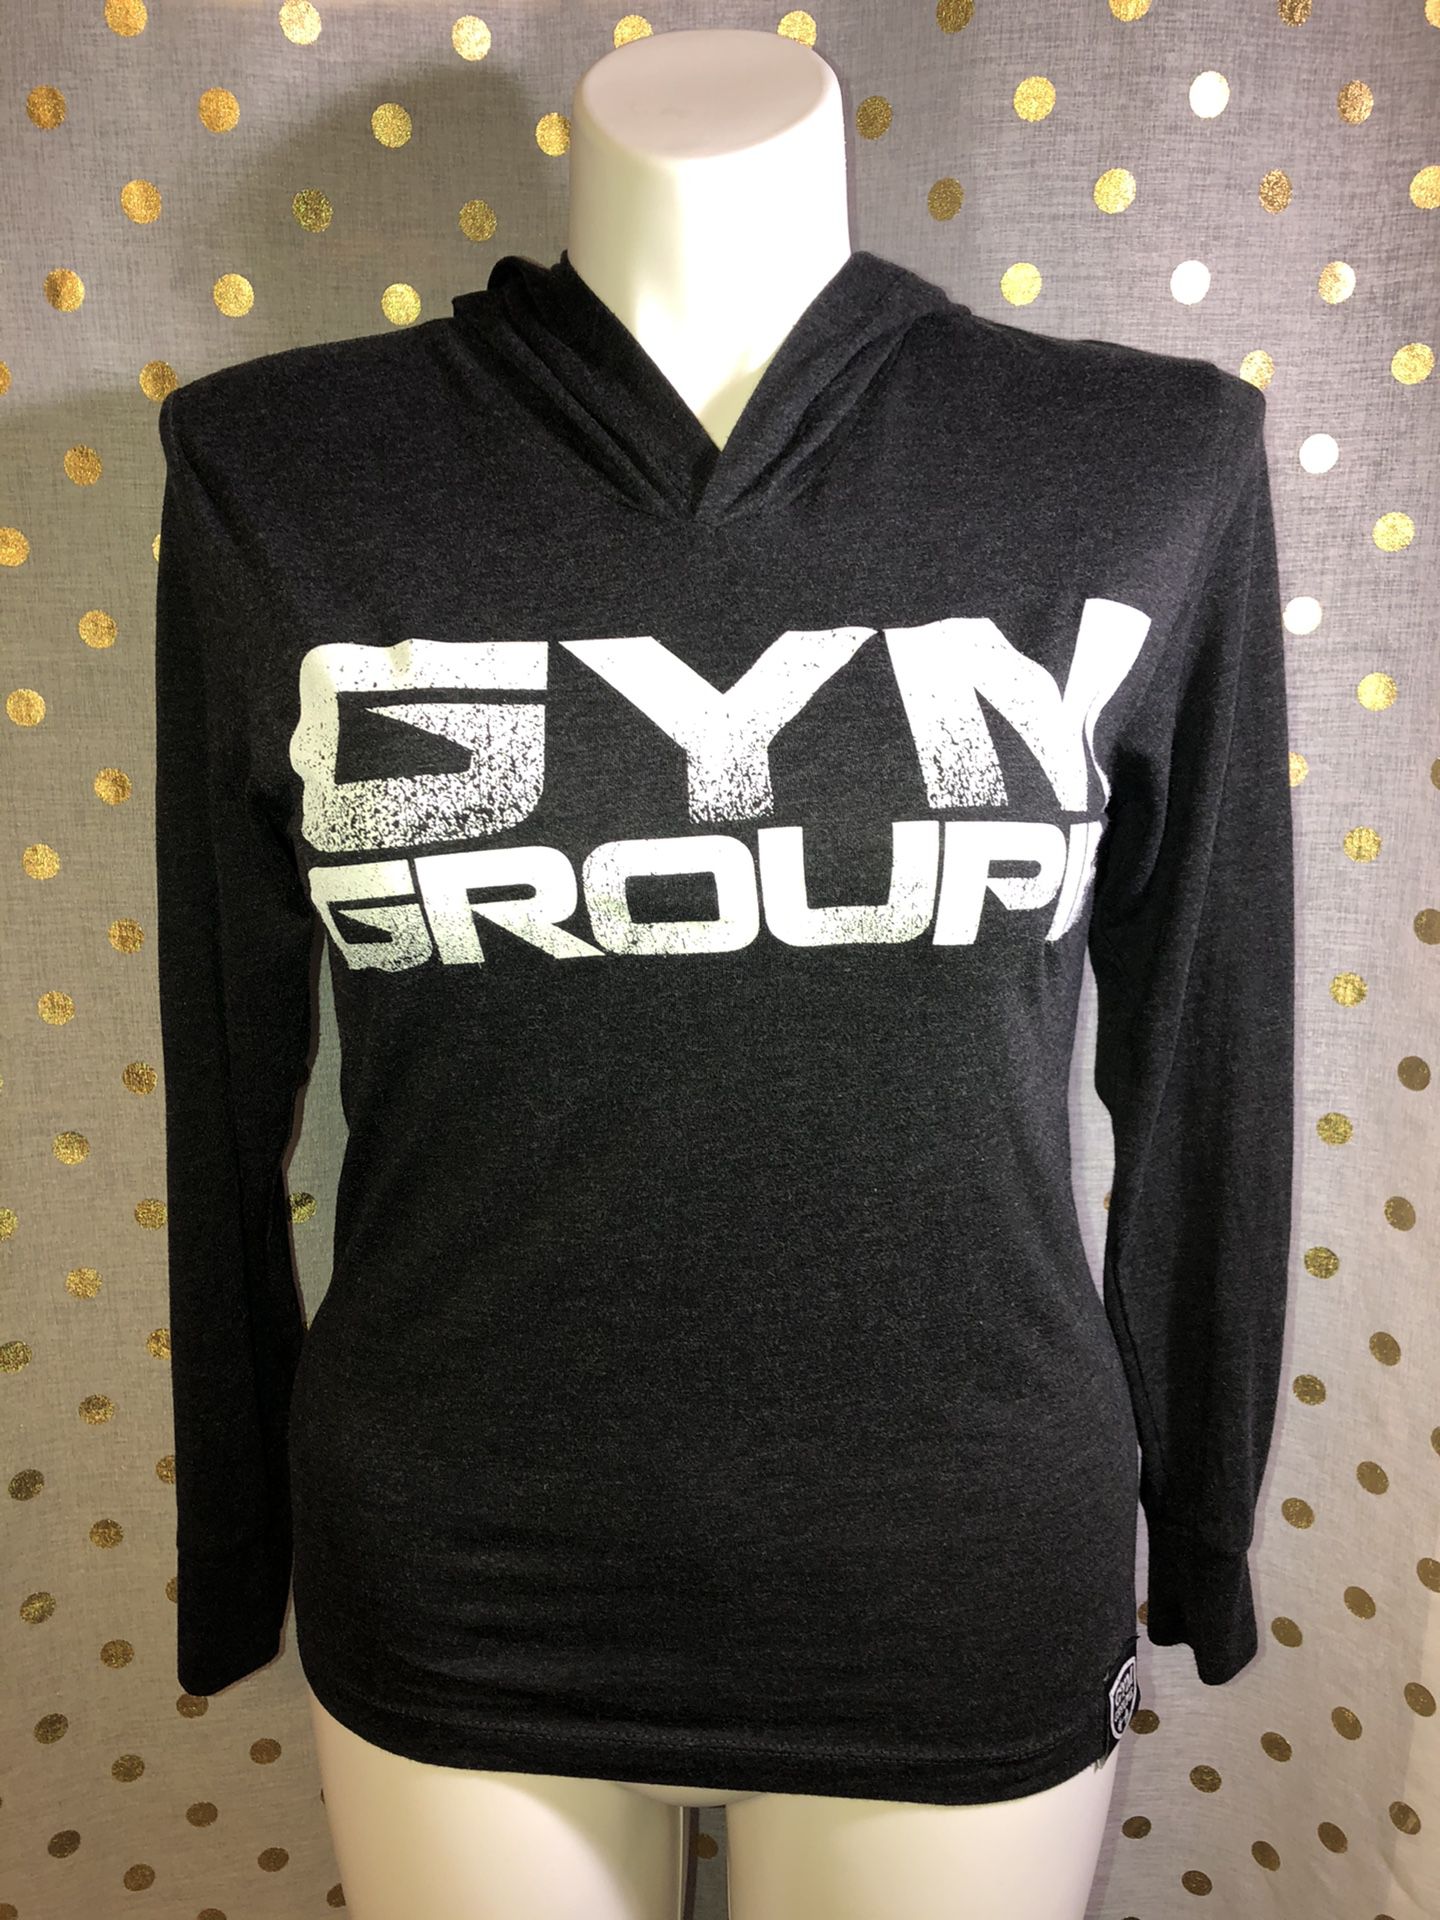 Gym Groupe size small hoodie black and white long sleeve shirt